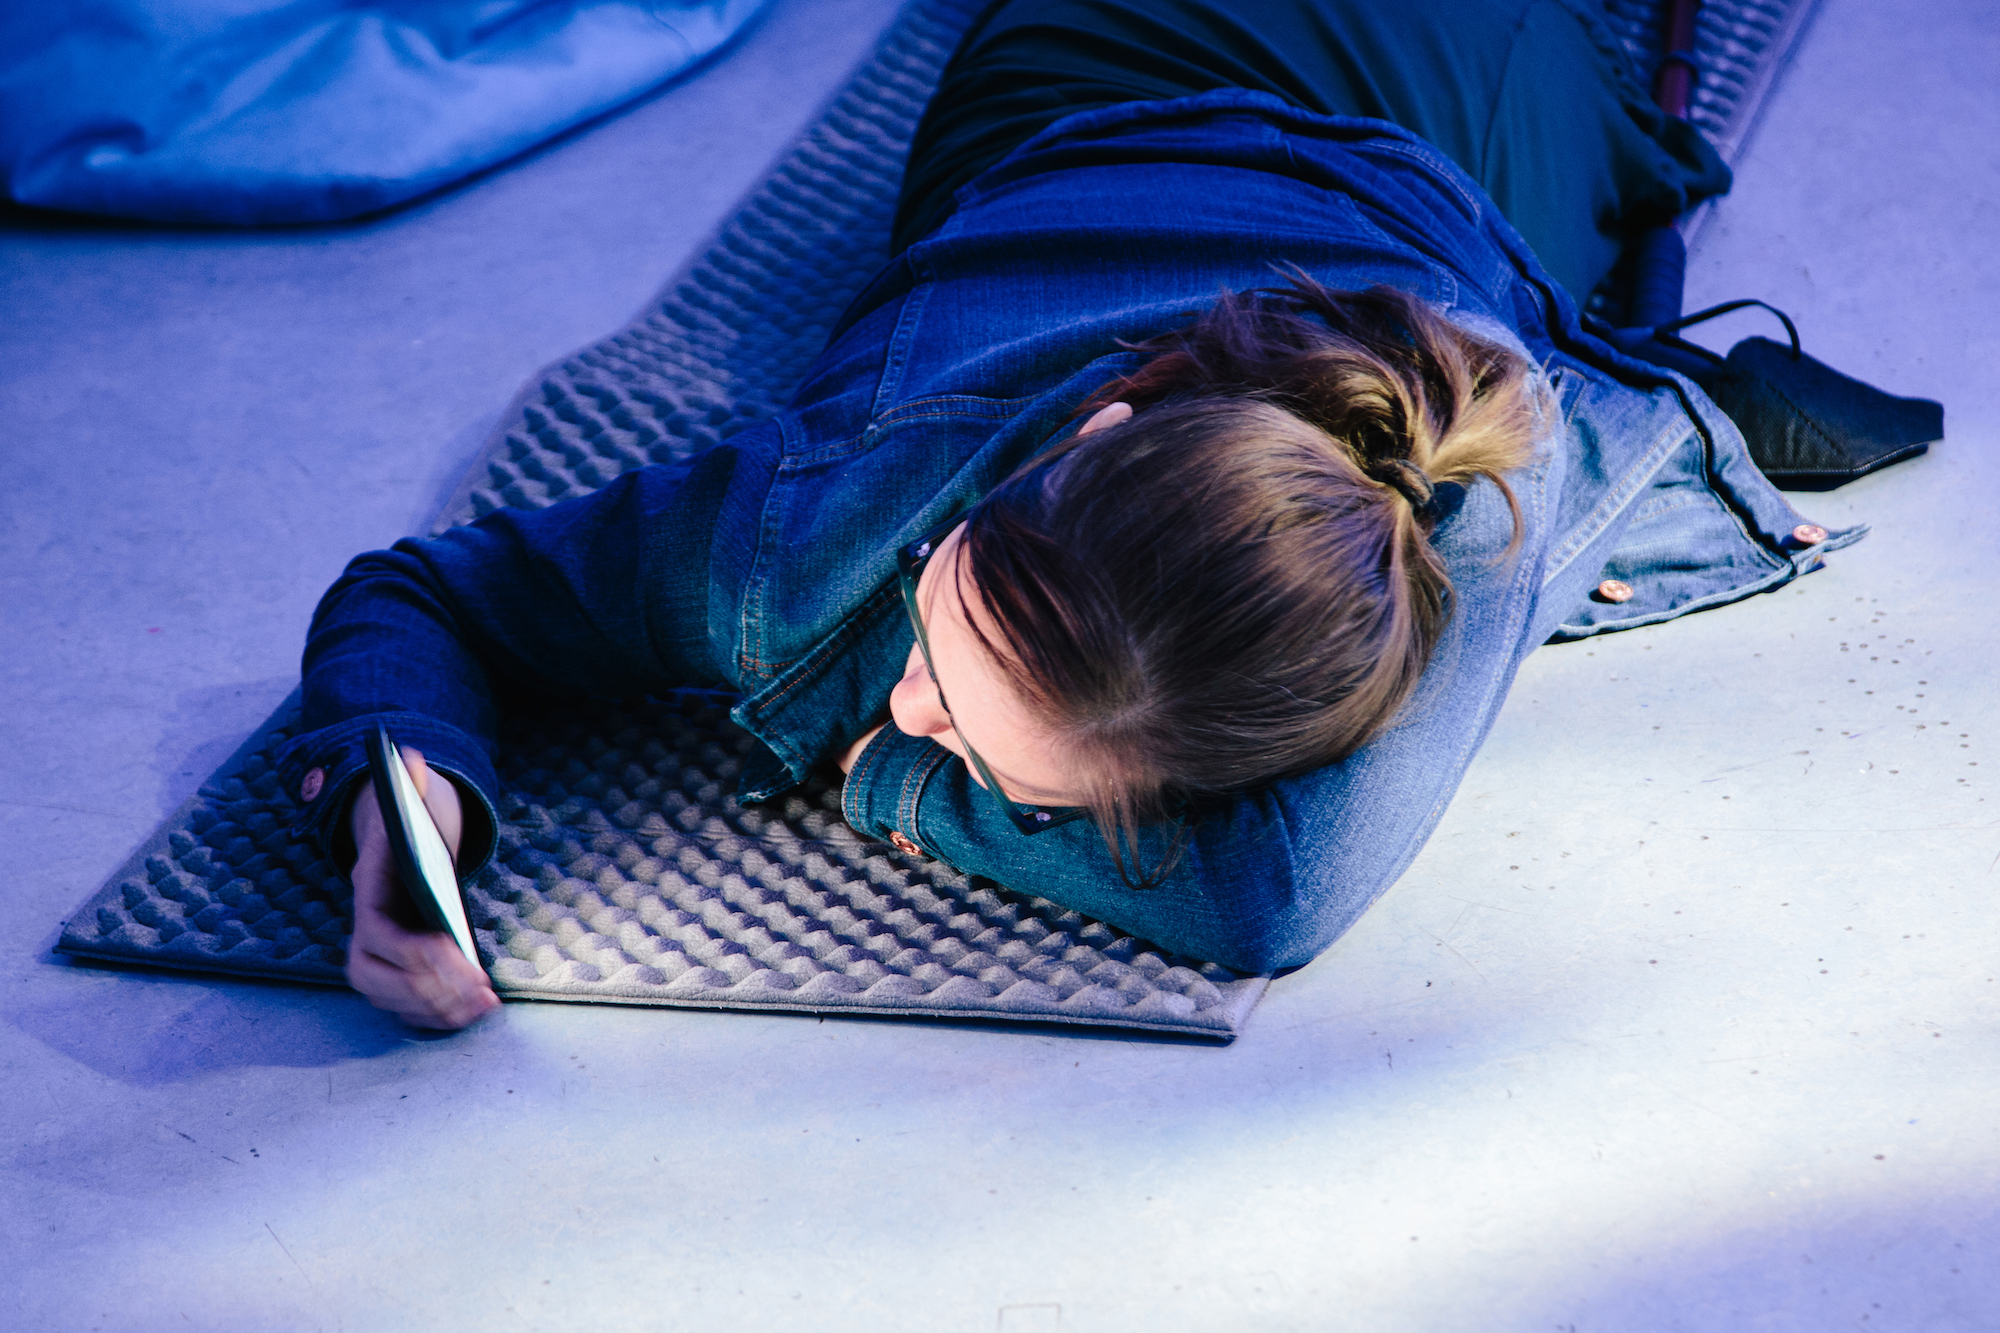 A person lies prone on a grey mat on the floor, resting their head on their arm, while looking at a glowing phone screen.